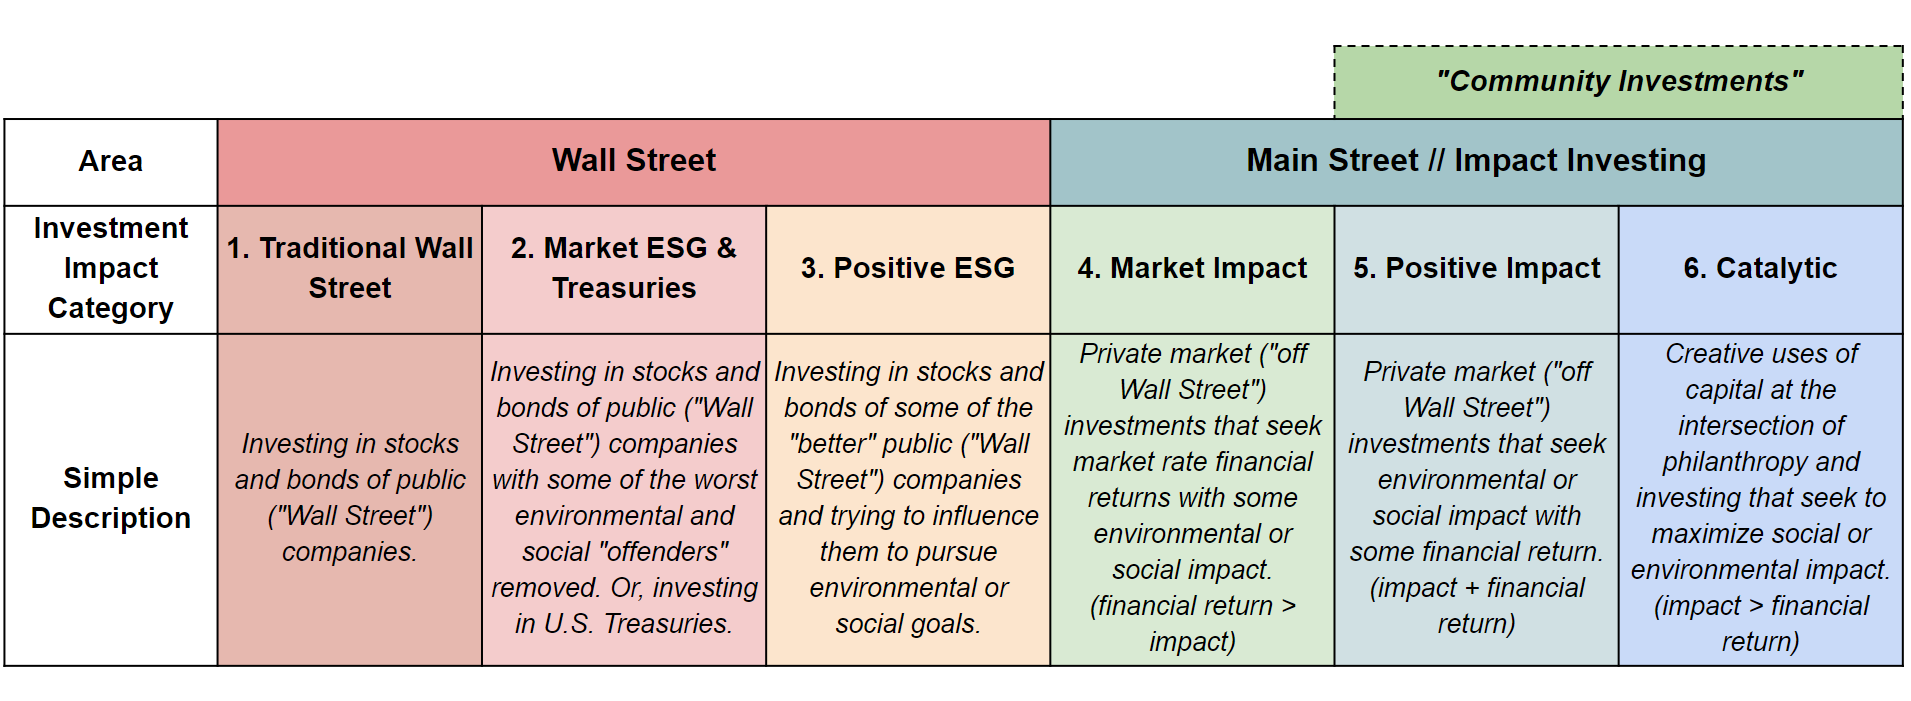 Investment Impact Spectrum and Categories